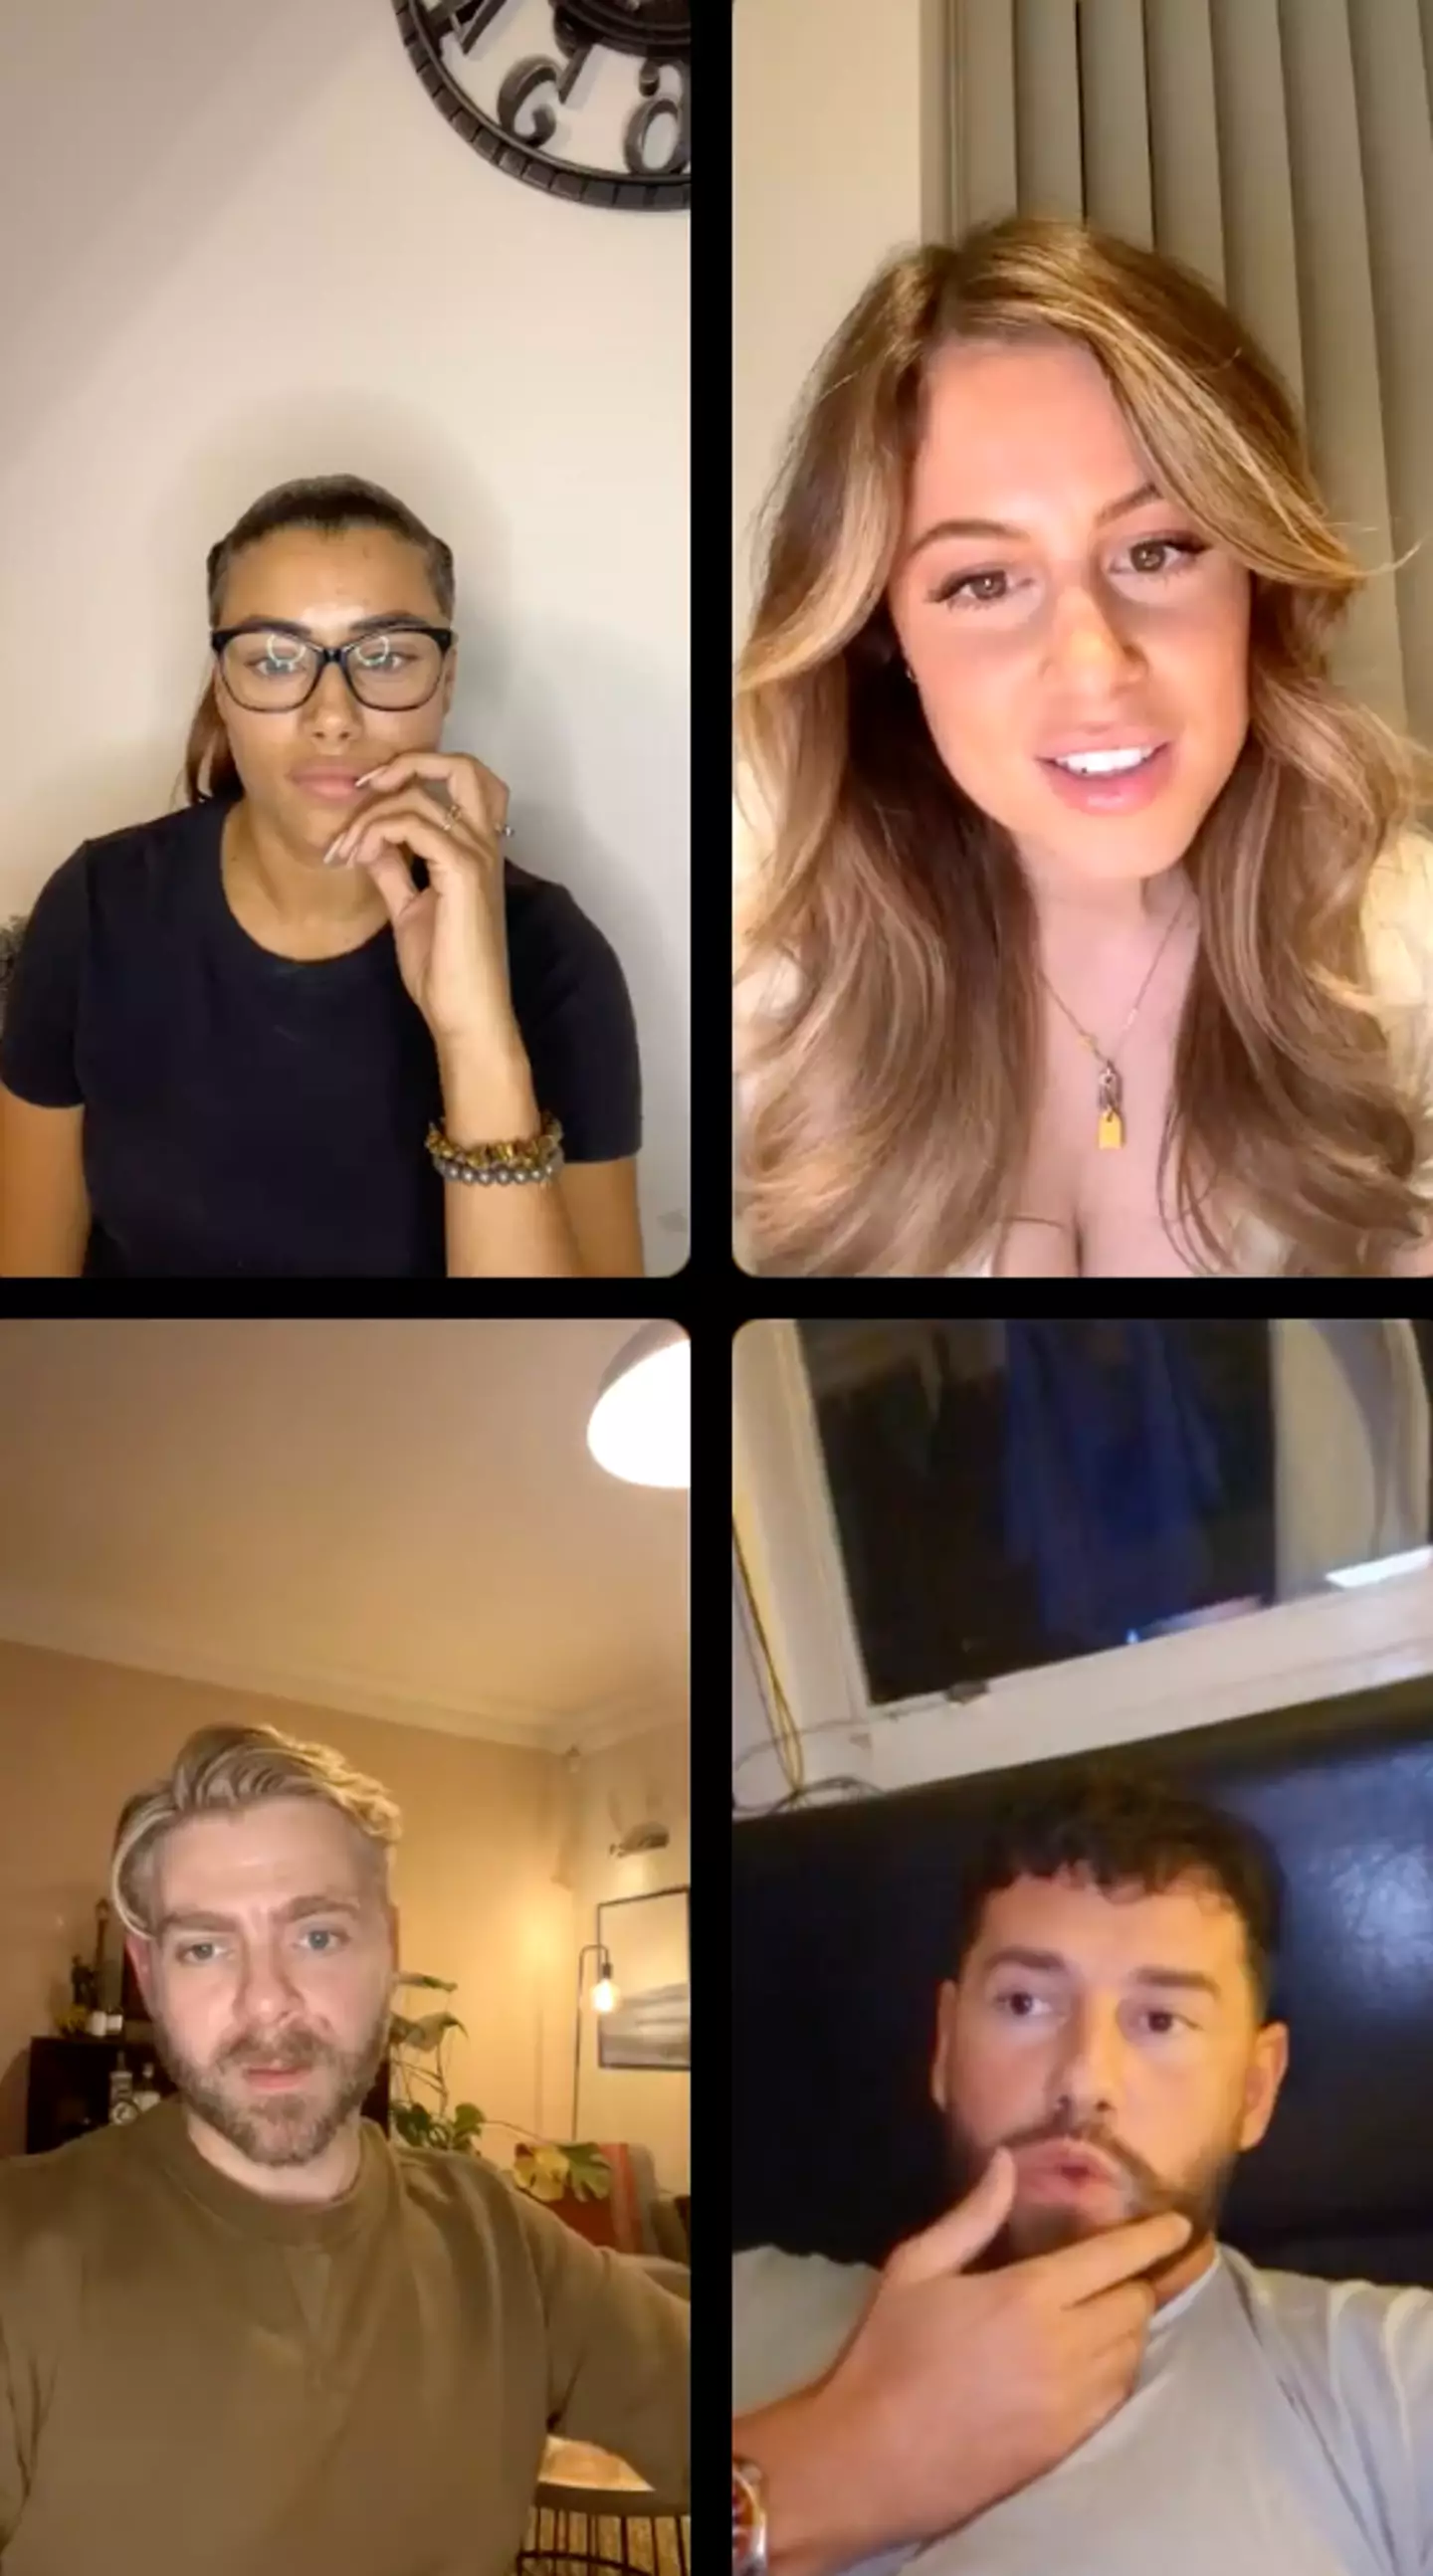 Four of the contestants took part in an Instagram Live Q&A session.